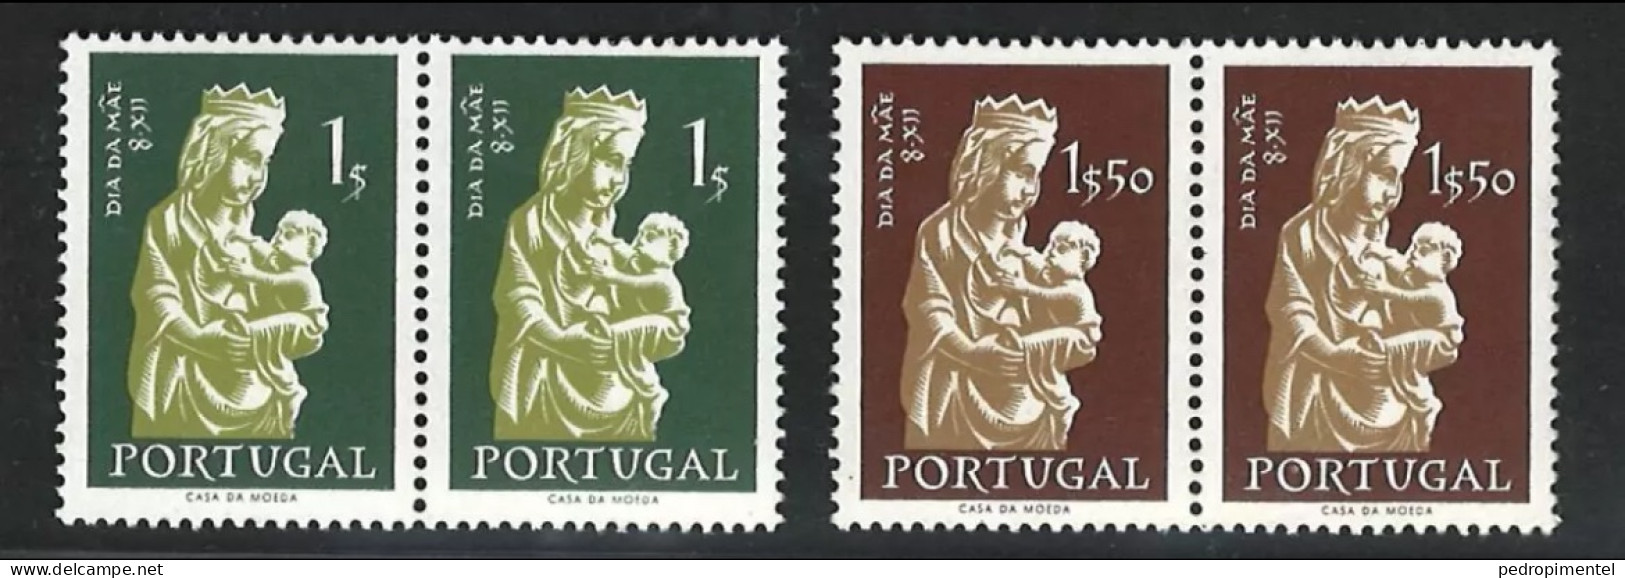 Portugal Stamps 1956 "Mothers Day" Condition MNH #825-826 (Pair) - Ungebraucht